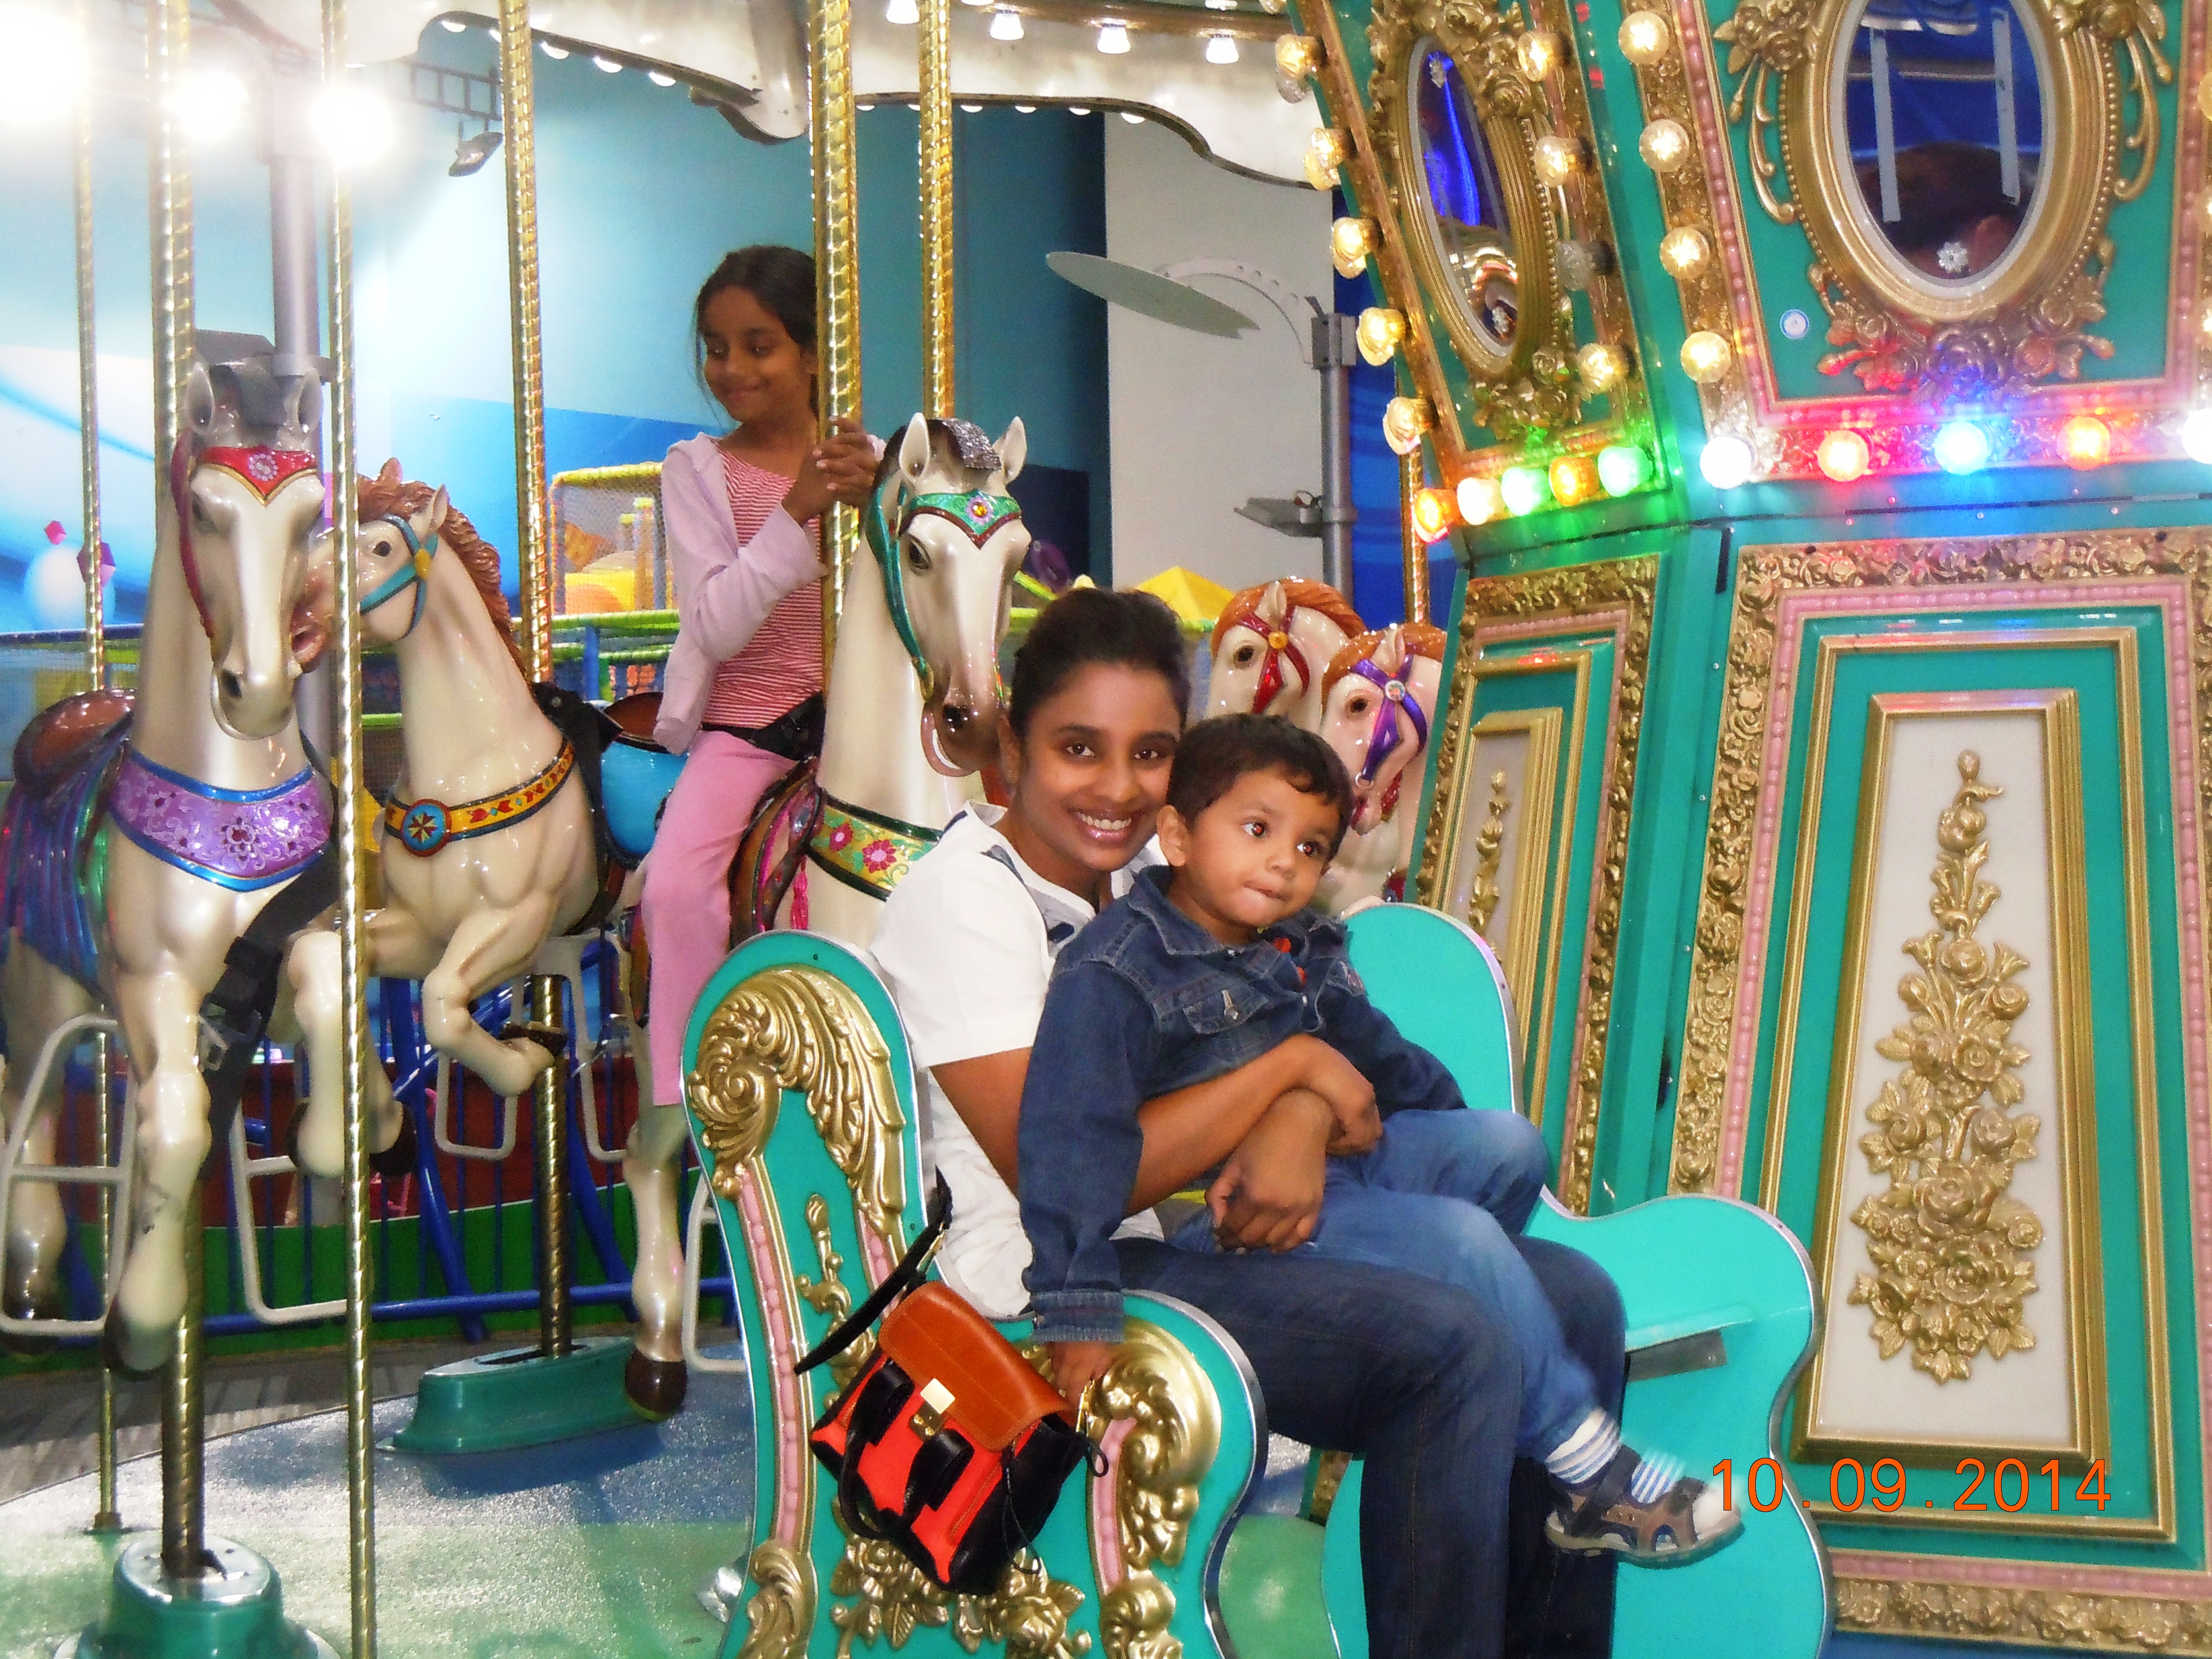 On the carousel with Piglet and Snubnose